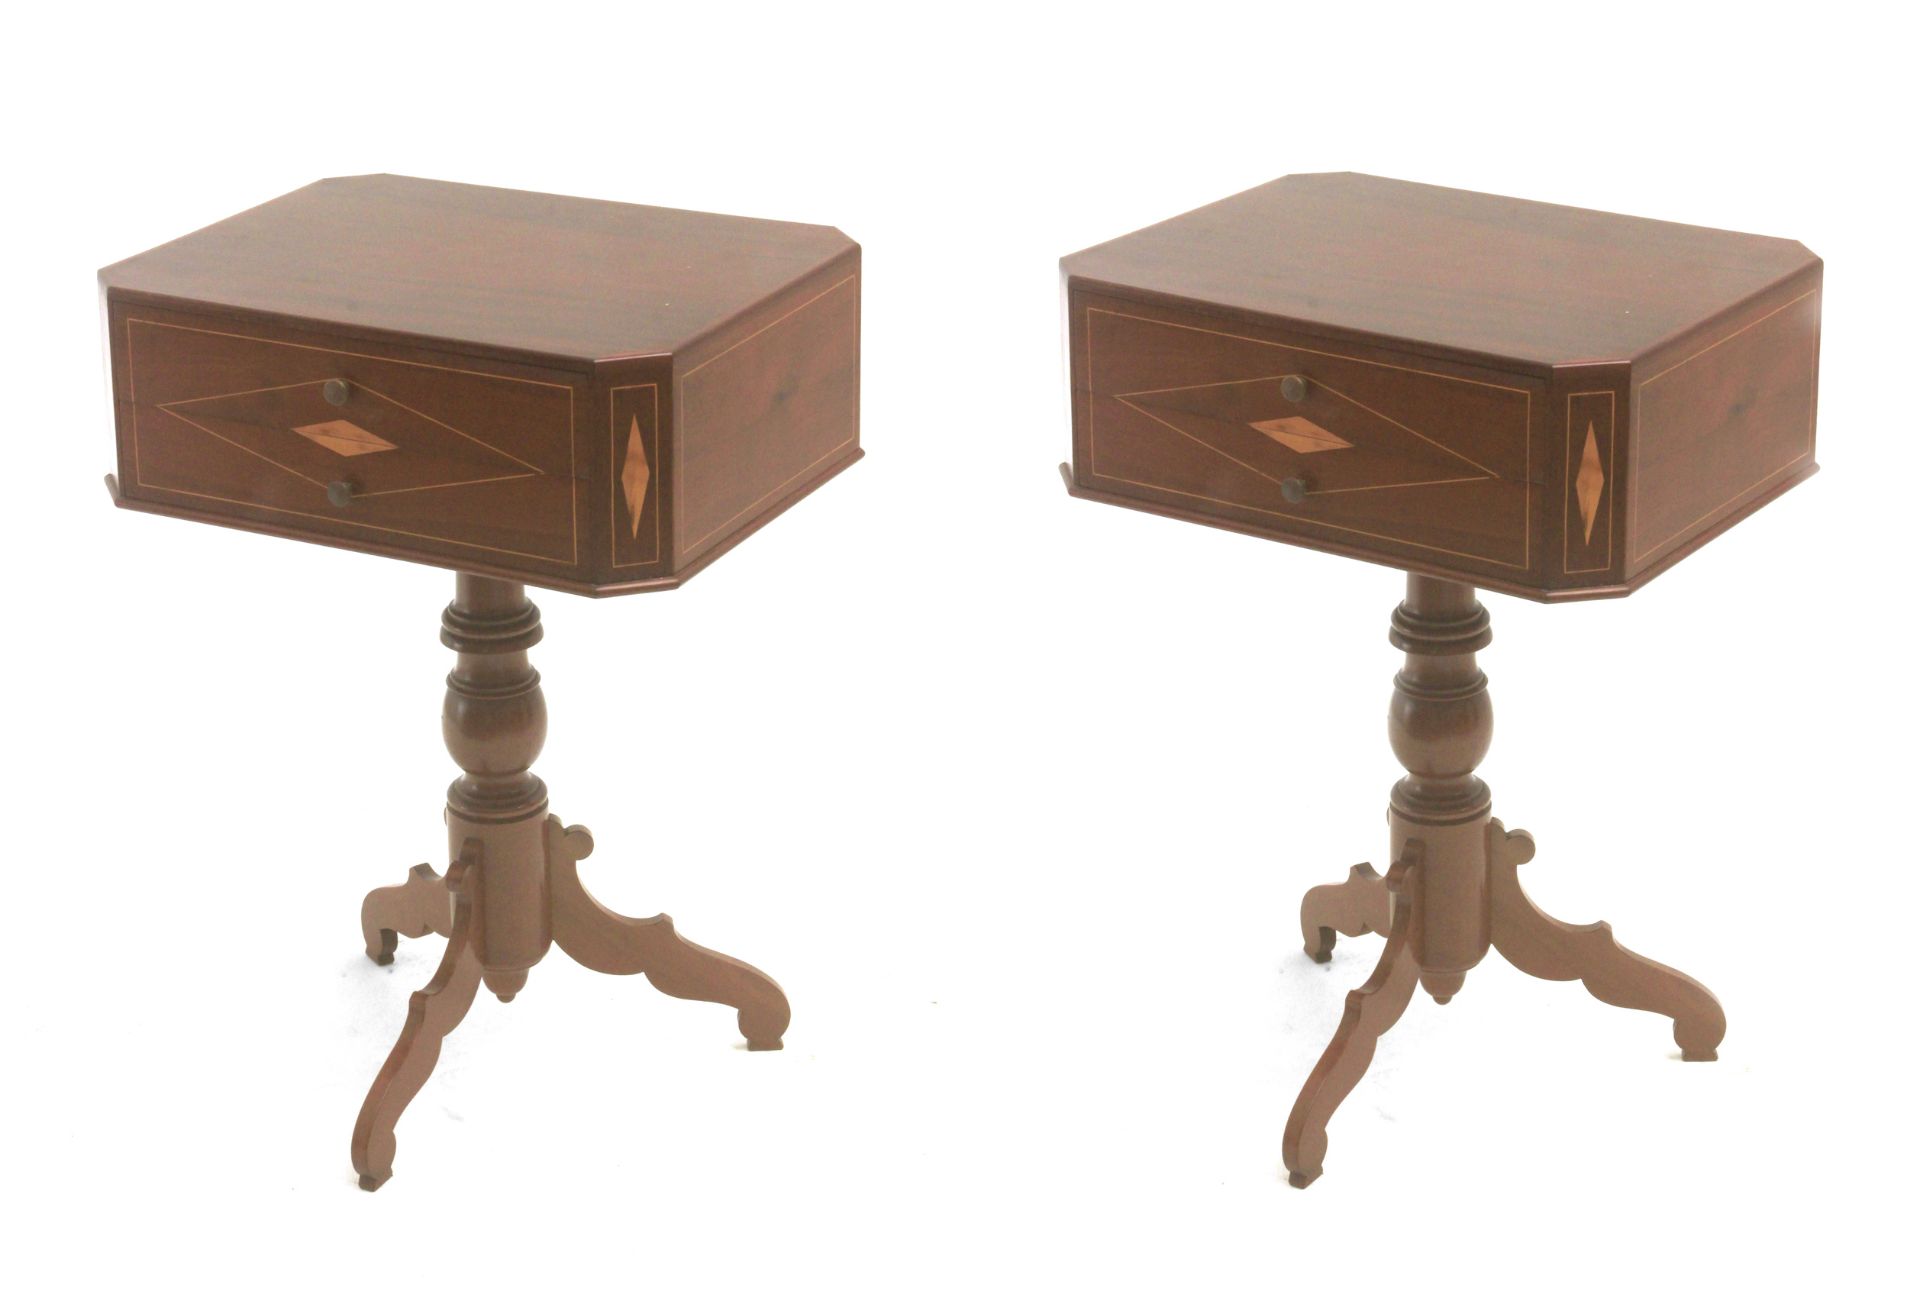 A pair of 19th century Isabelino night stands in mahogany